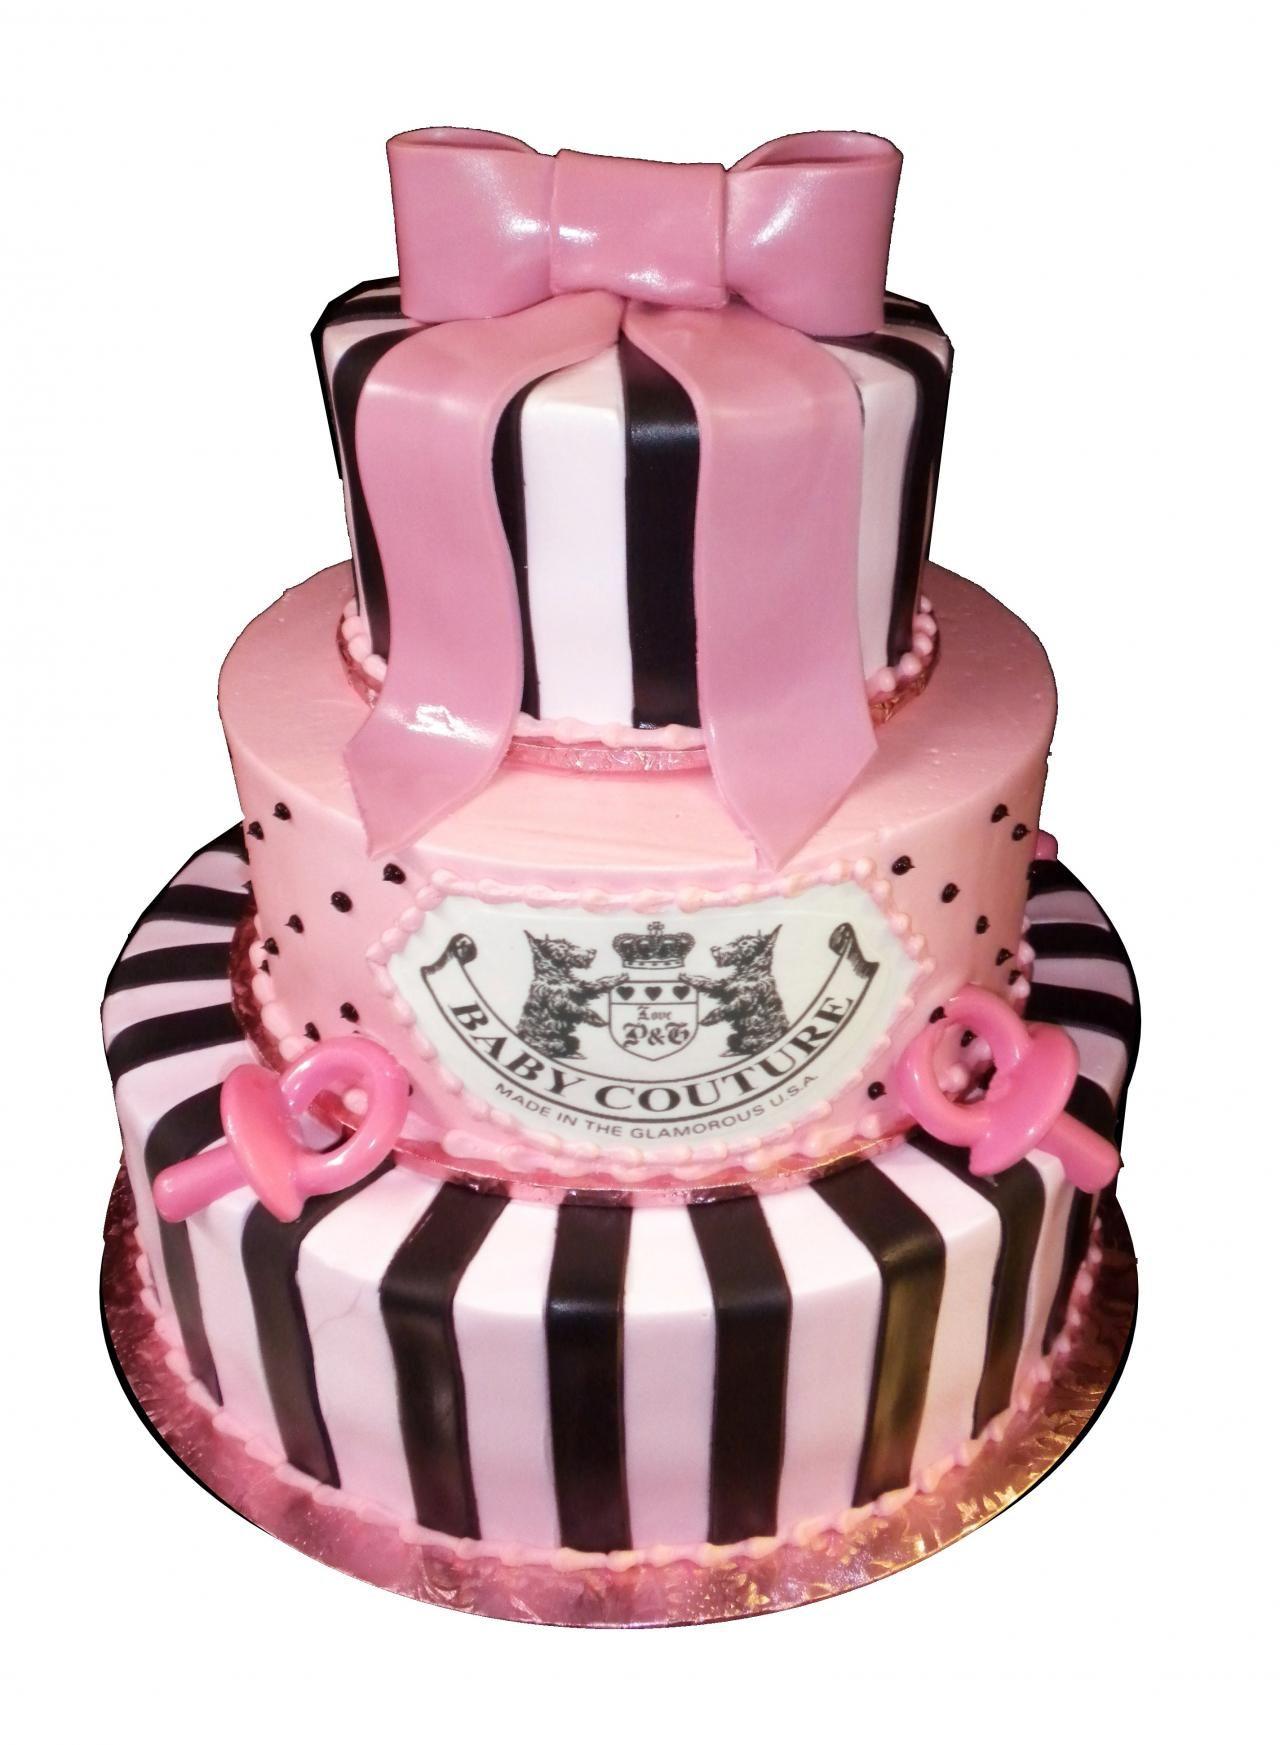 Baby Couture Logo - Baby Shower Cakes